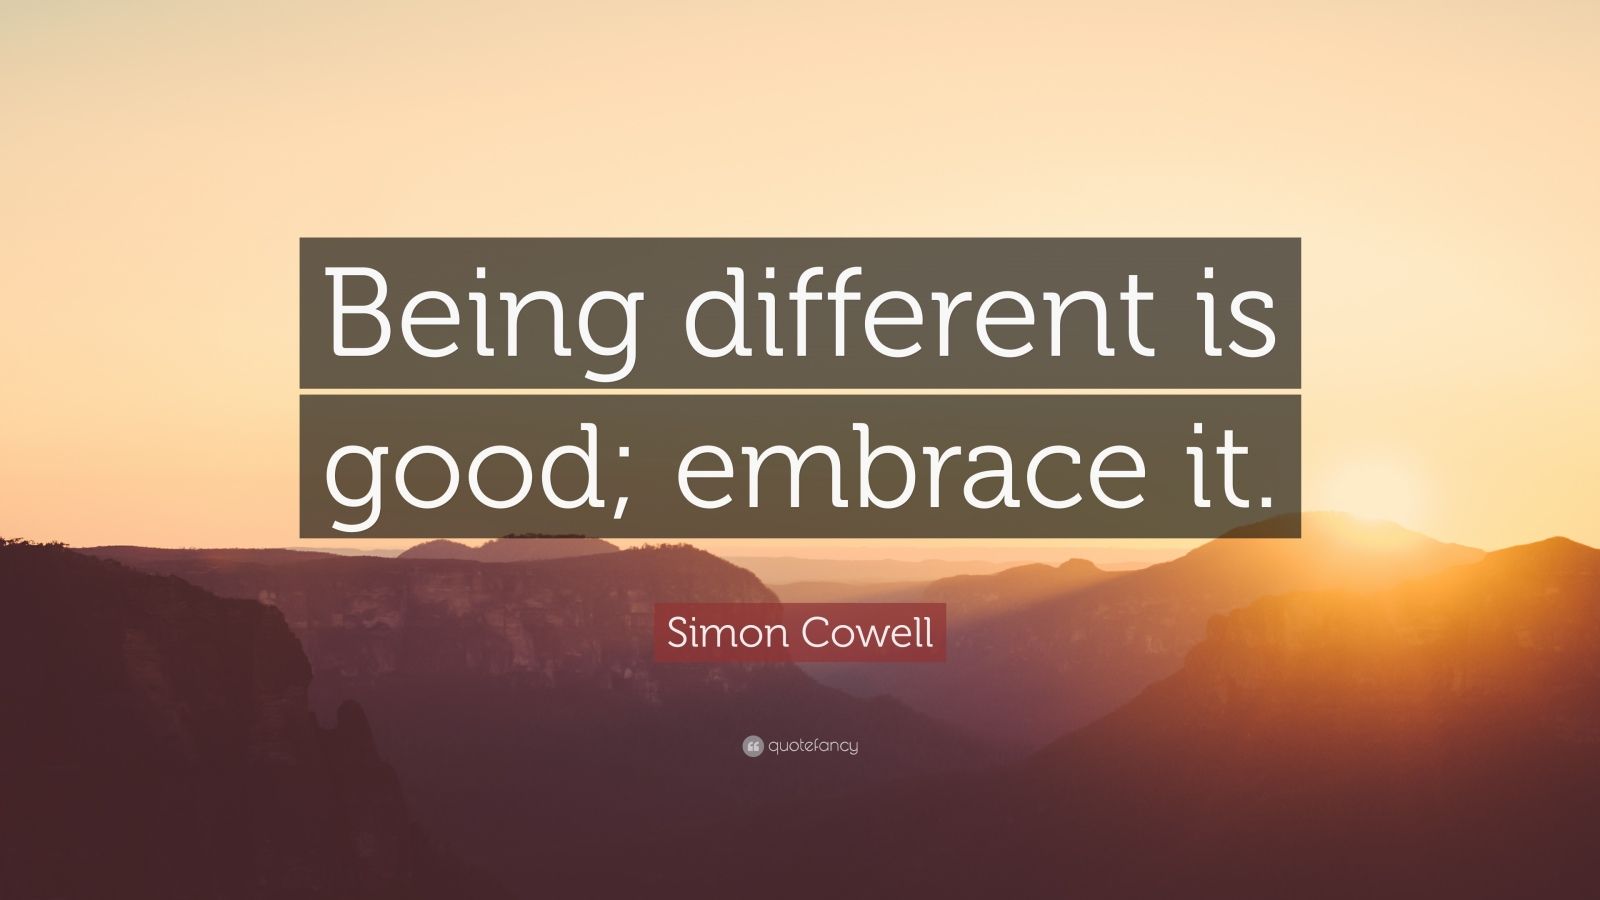 Simon Cowell Quote: “Being different is good; embrace it.”